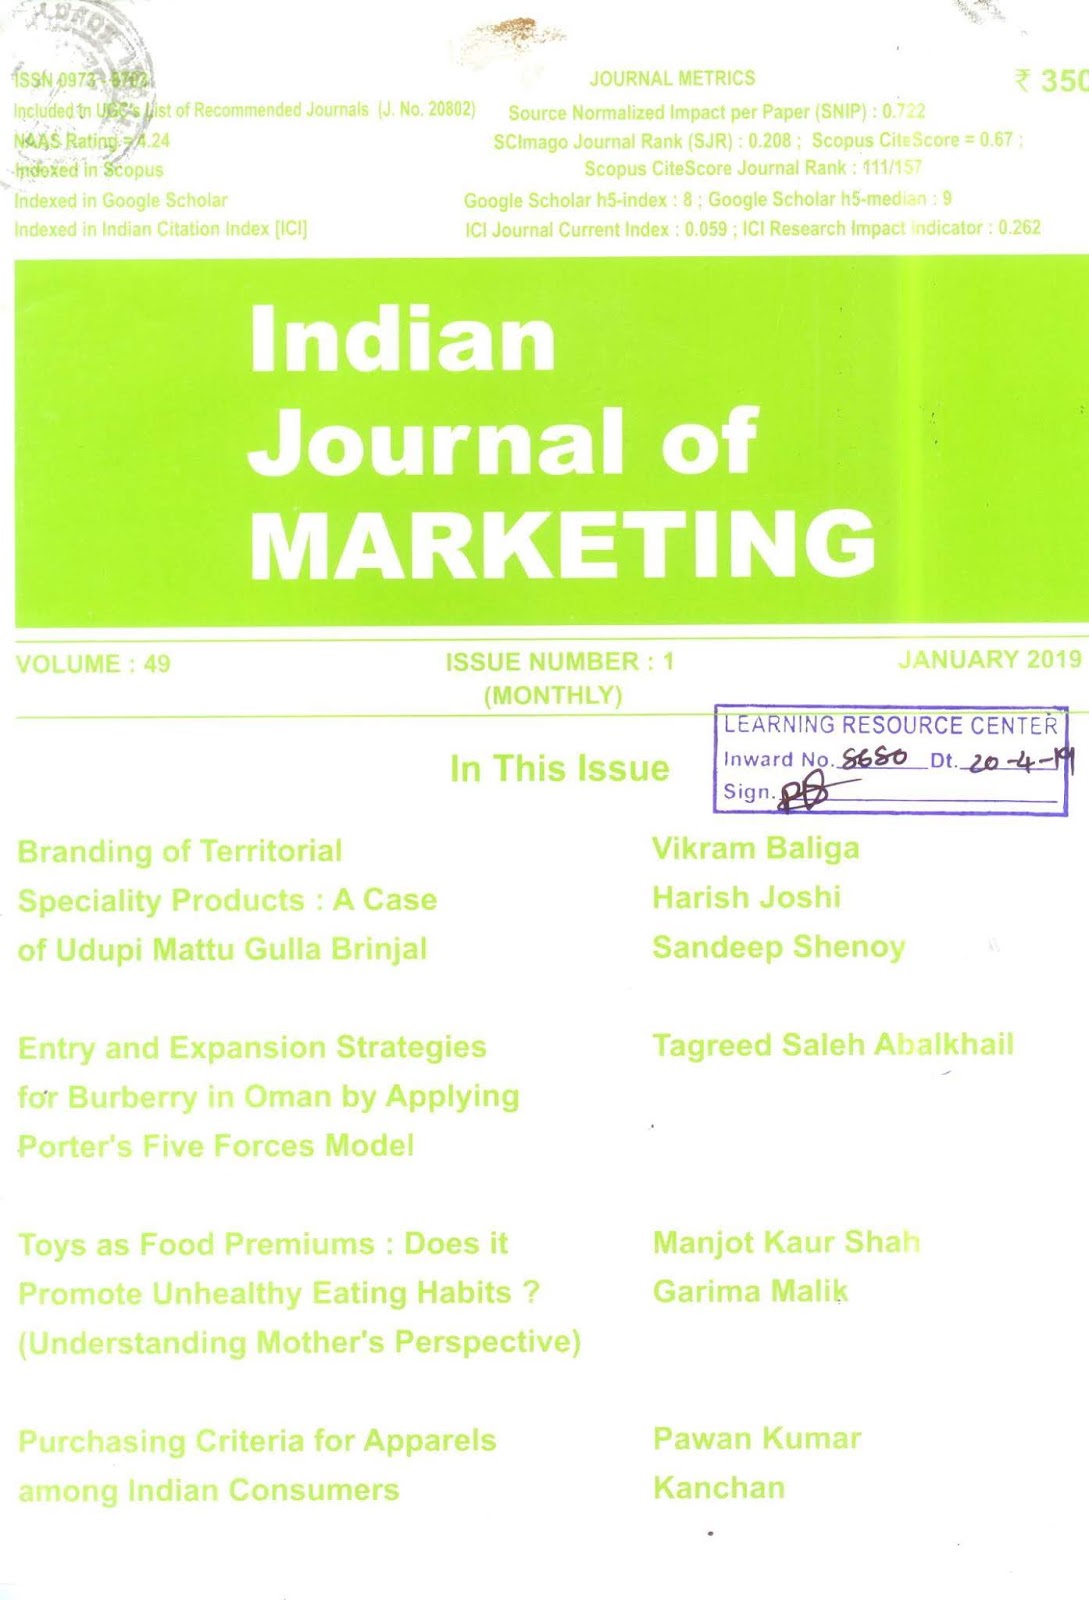 http://indianjournalofmarketing.com/index.php/ijom/issue/view/8327